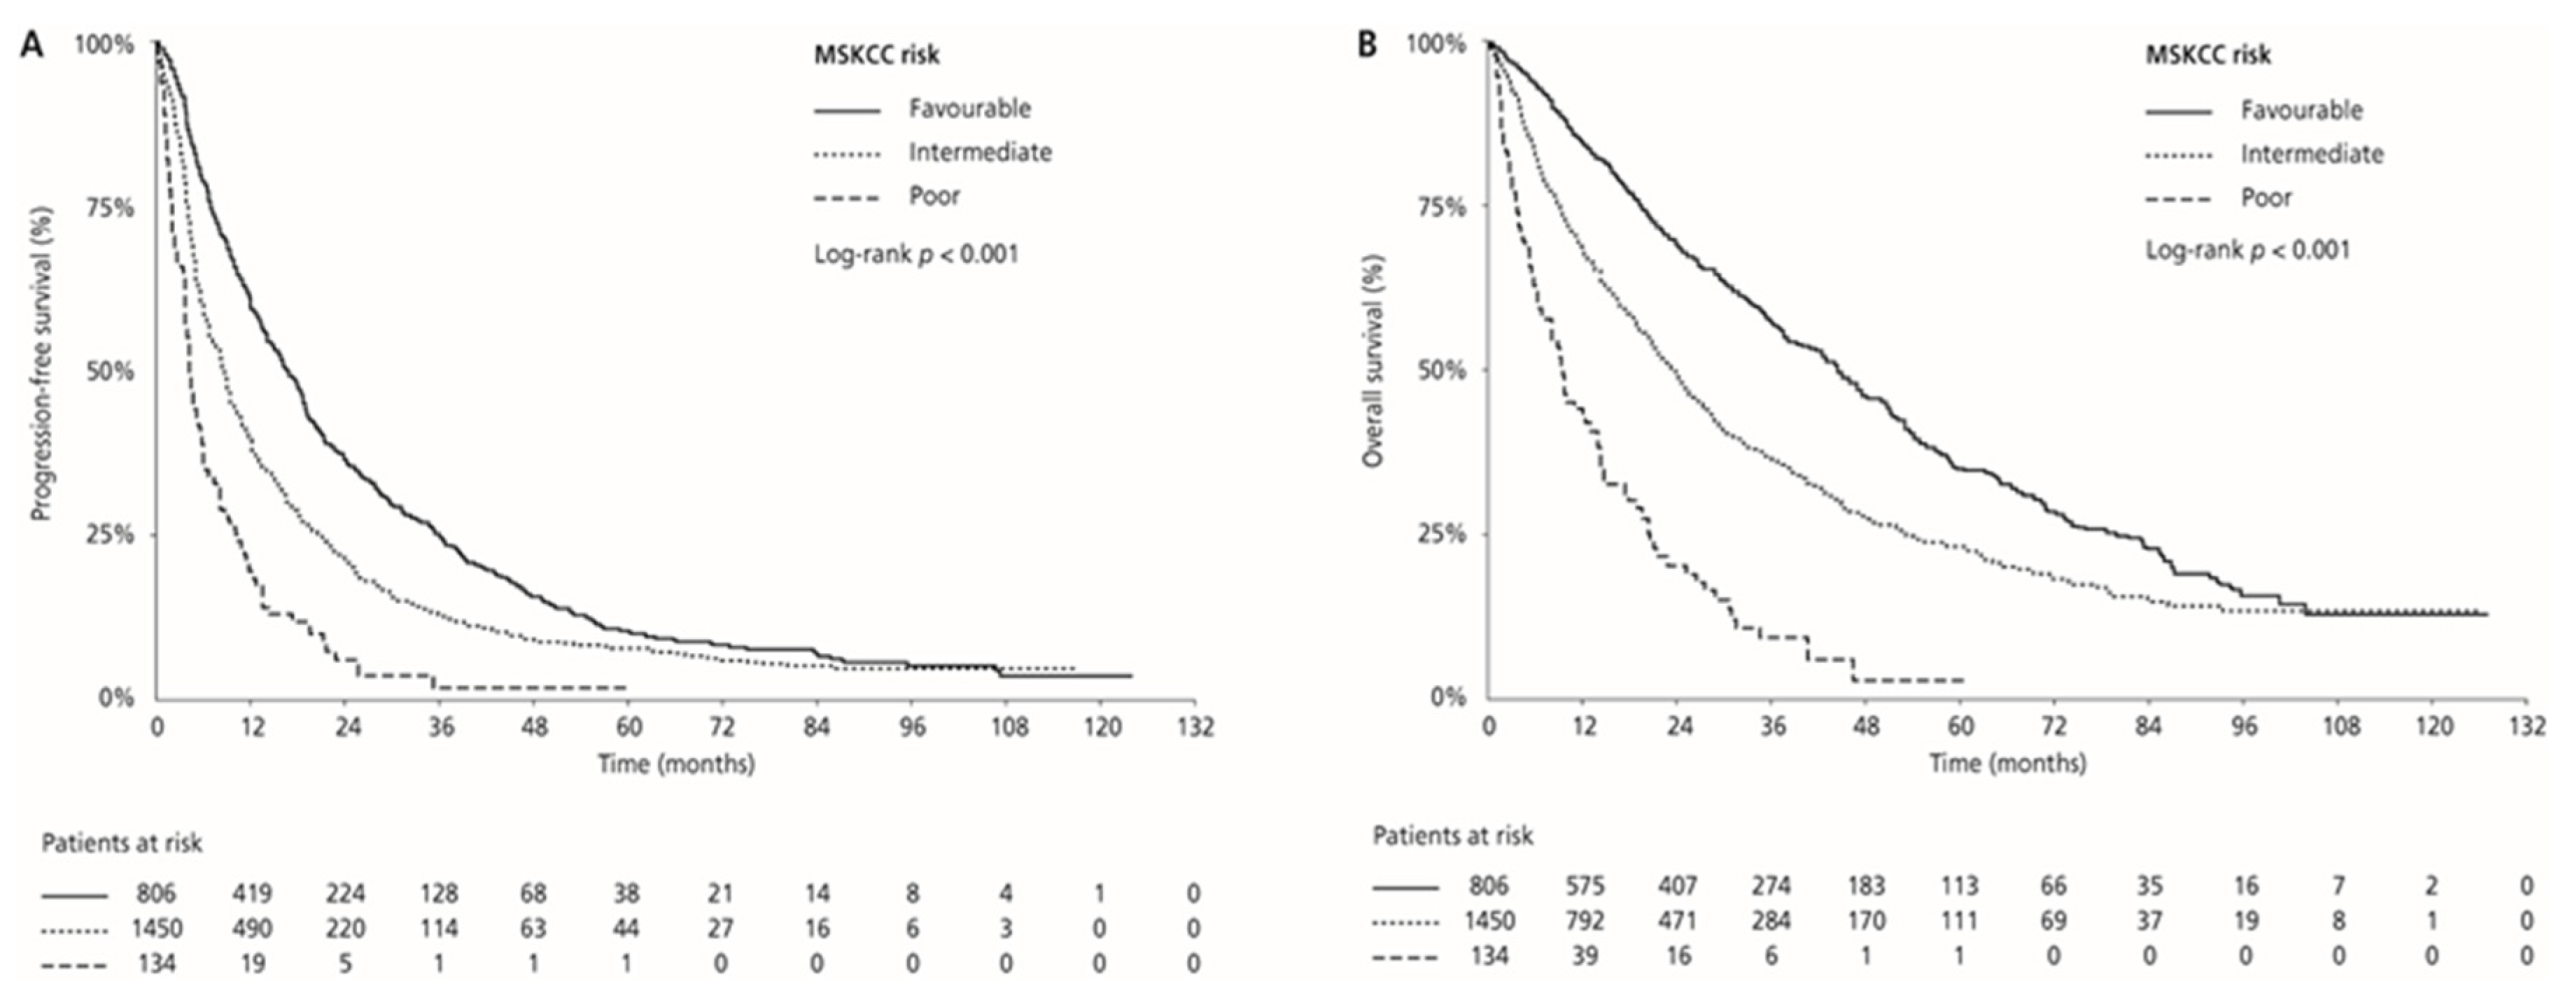 Cancers | Free Full-Text | Outcomes According to MSKCC Risk Score with  Focus on the Intermediate-Risk Group in Metastatic Renal Cell Carcinoma  Patients Treated with First-Line Sunitinib: A Retrospective Analysis of 2390